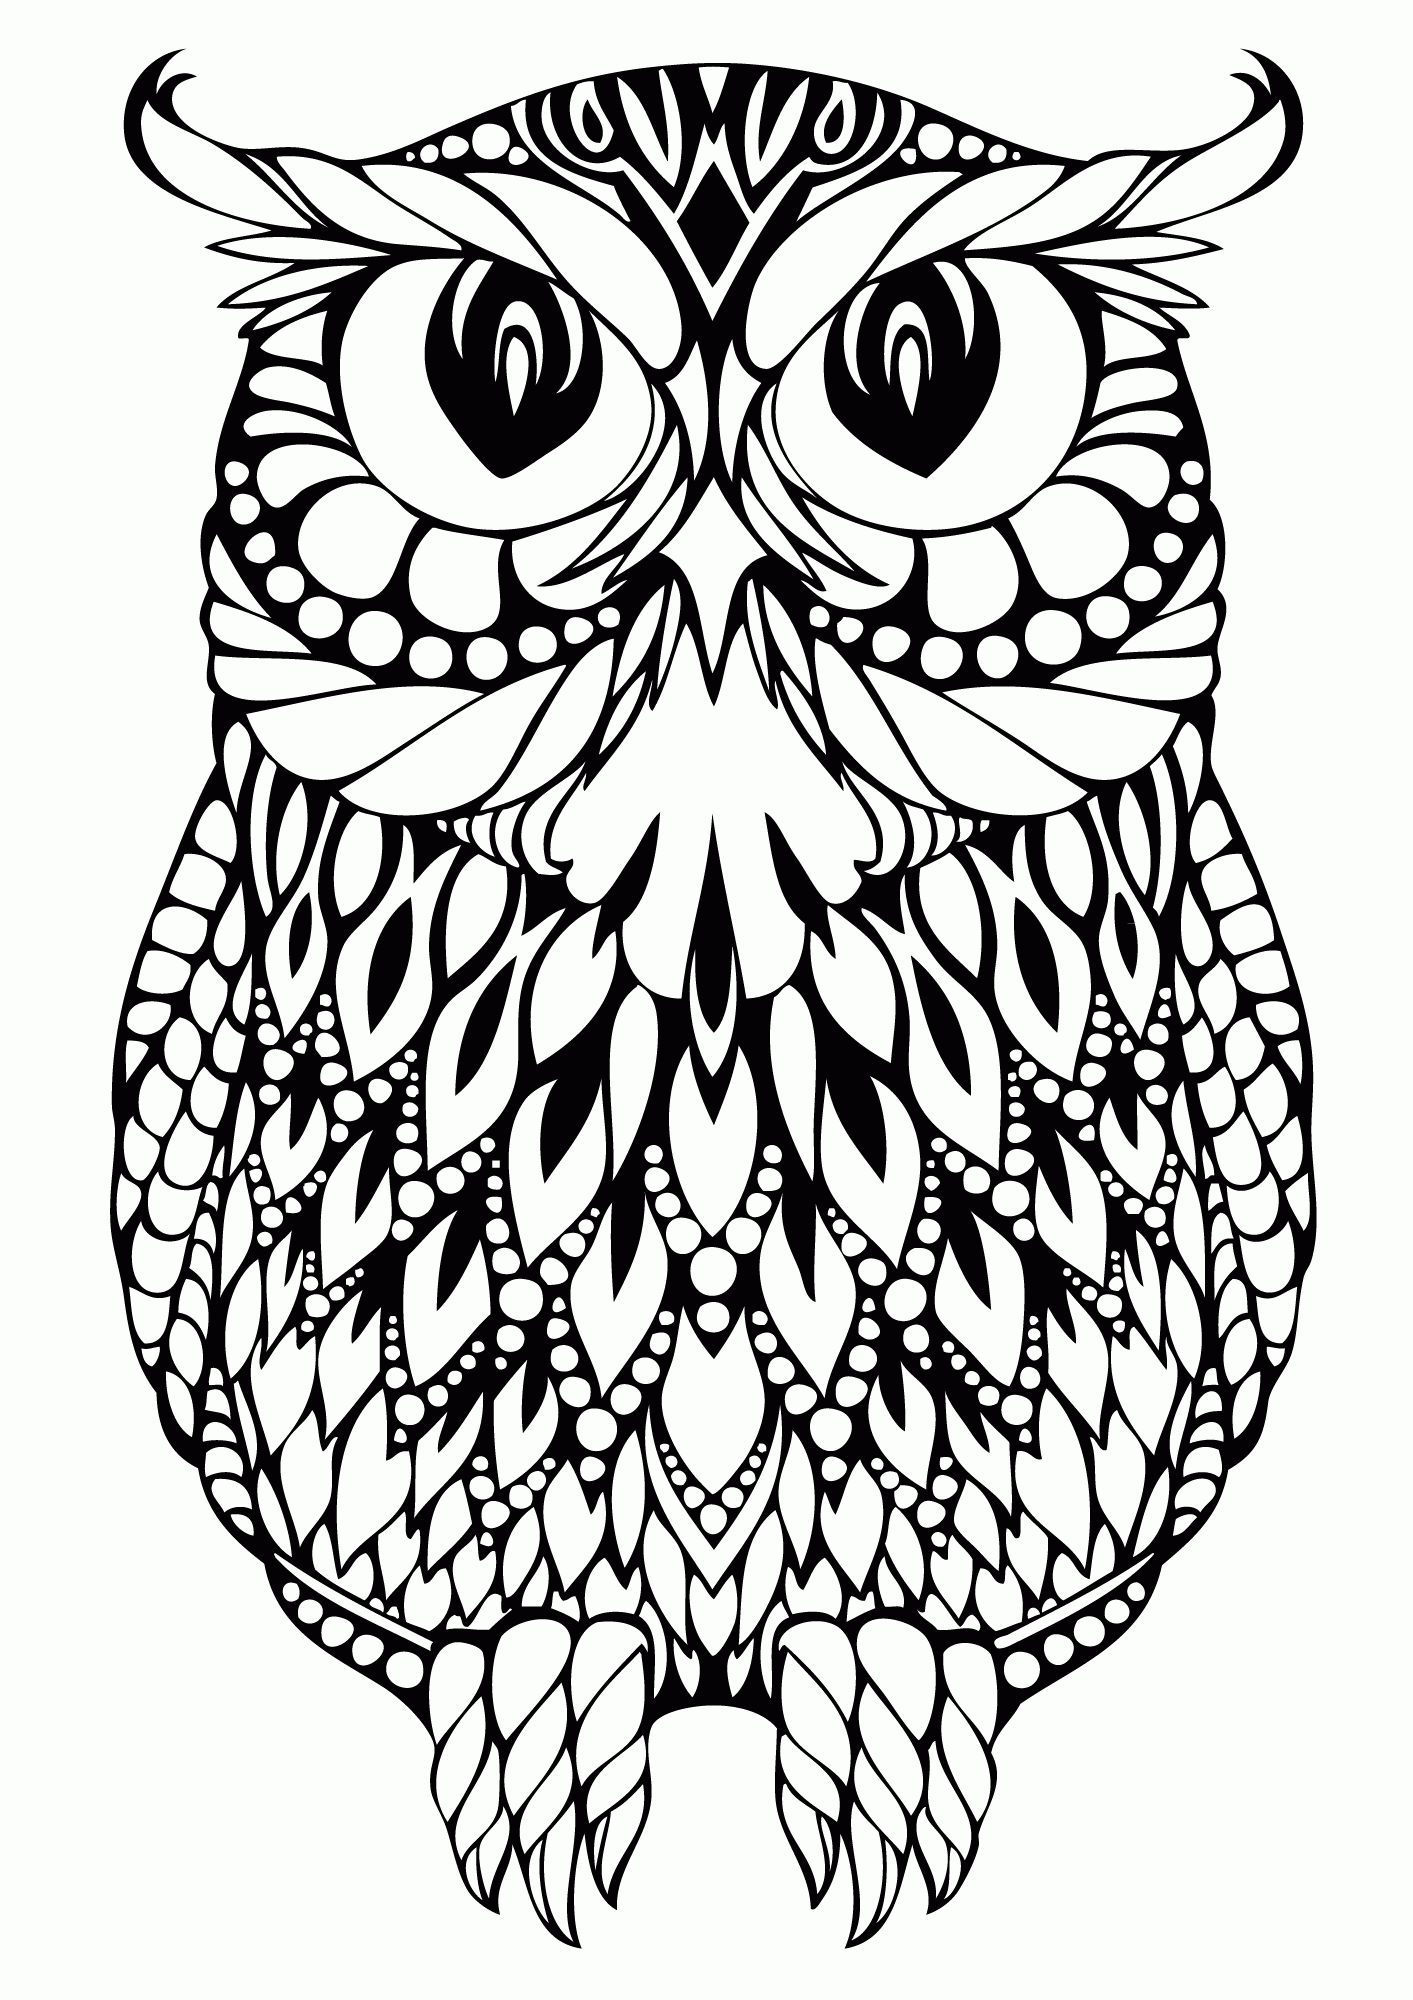 Sugar Skull Owl Coloring Pages - Coloring Home